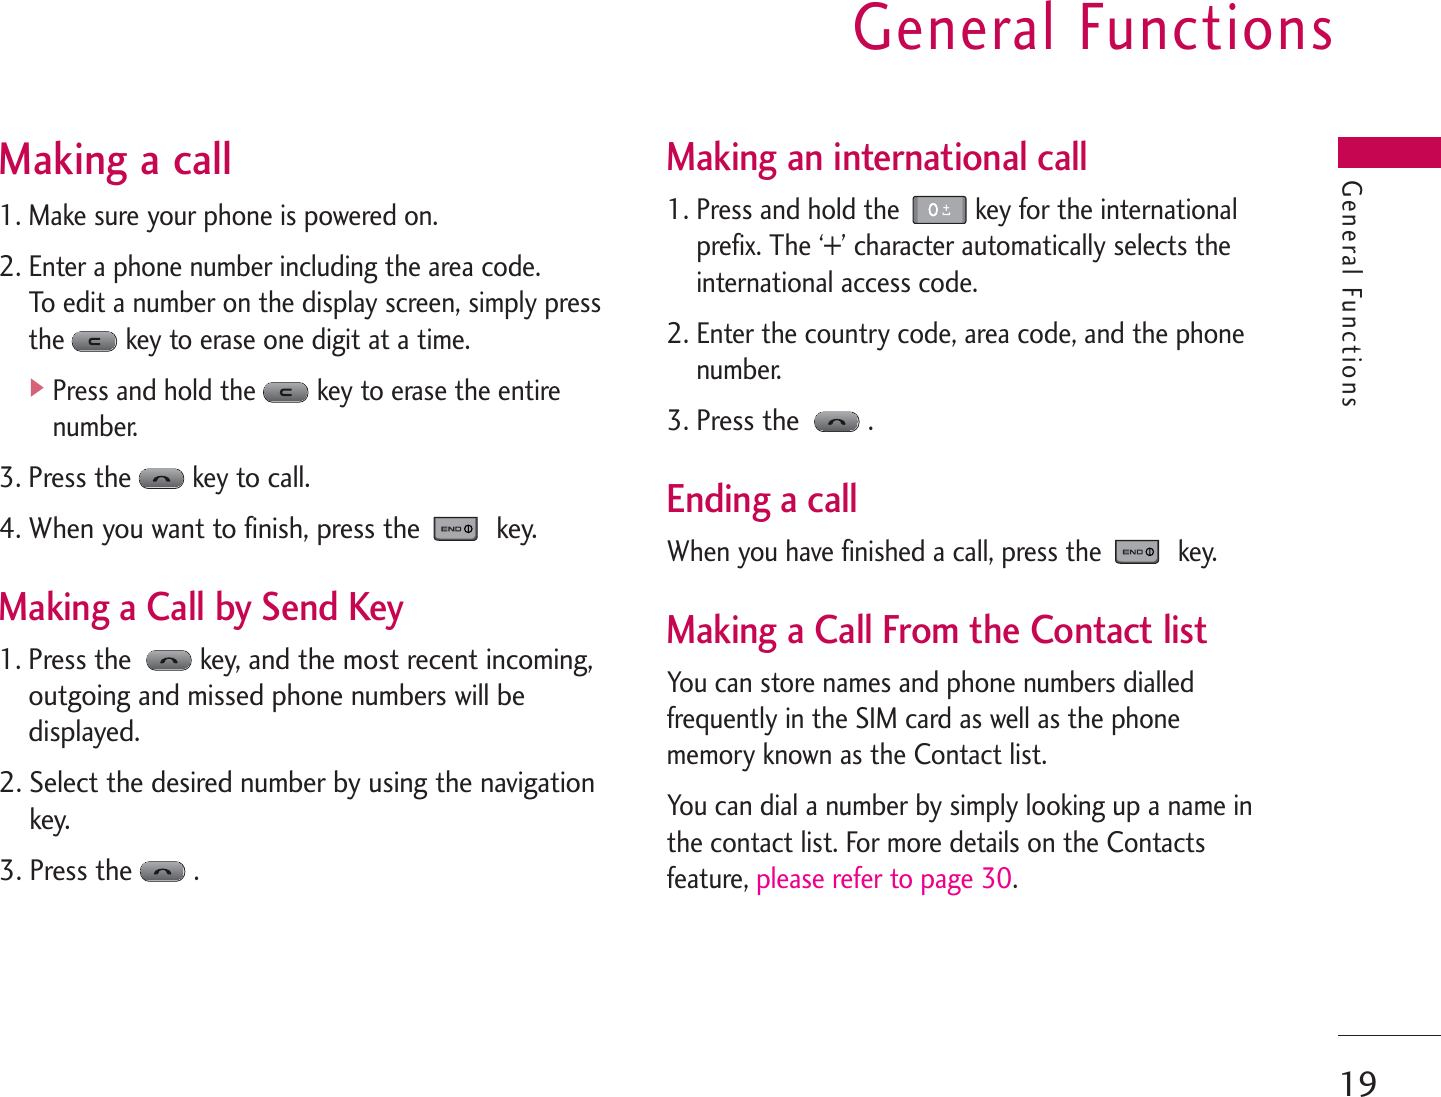 General Functions19General FunctionsMaking a call1. Make sure your phone is powered on.2. Enter a phone number including the area code. To edit a number on the display screen, simply pressthe key to erase one digit at a time.]Press and hold the key to erase the entirenumber.3. Press thekey to call.4. When you want to finish, press the  key.Making a Call by Send Key1. Press the key, and the most recent incoming,outgoing and missed phone numbers will bedisplayed.2. Select the desired number by using the navigationkey.3. Press the.Making an international call1. Press and hold the  key for the internationalprefix. The ‘+’ character automatically selects theinternational access code.2. Enter the country code, area code, and the phonenumber.3. Press the.Ending a callWhen you have finished a call, press the key.Making a Call From the Contact listYou can store names and phone numbers dialledfrequently in the SIM card as well as the phonememory known as the Contact list.You can dial a number by simply looking up a name inthe contact list. For more details on the Contactsfeature, please refer to page 30.